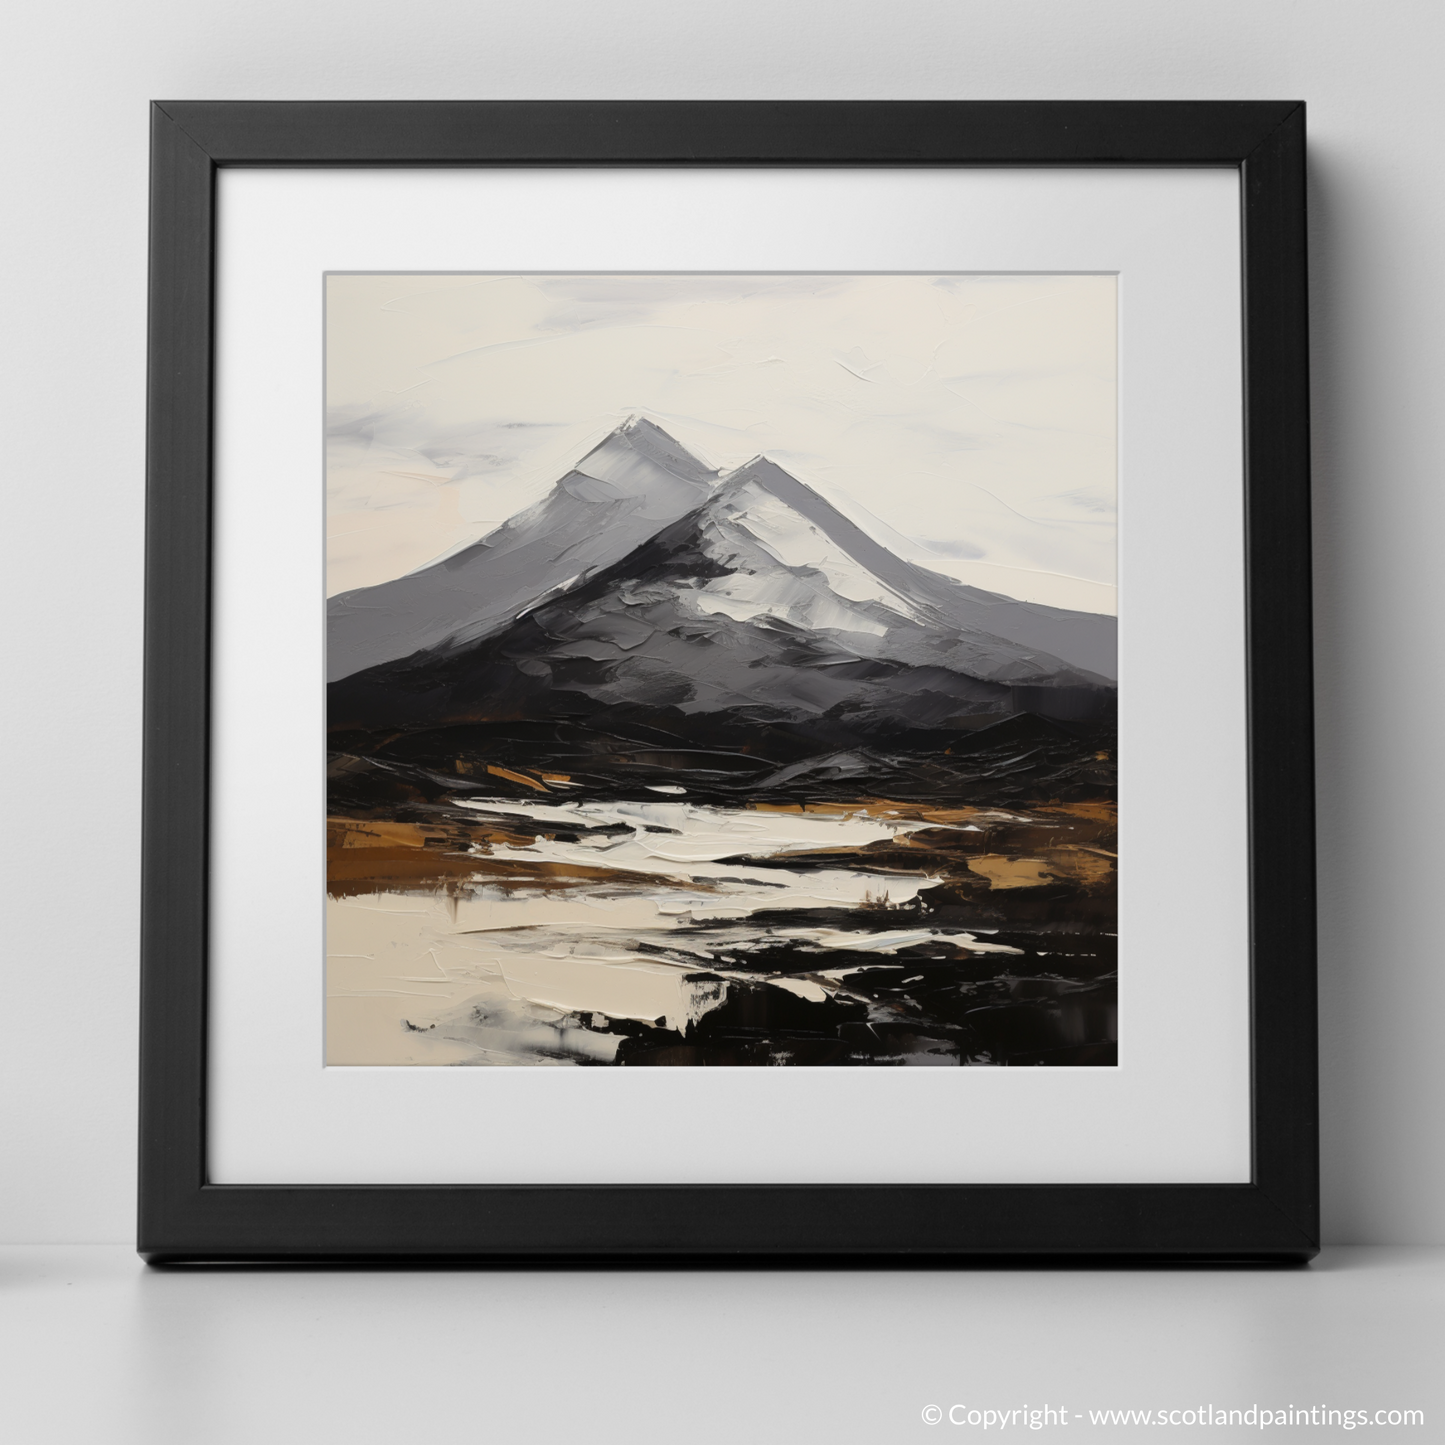 Art Print of Ben More with a black frame